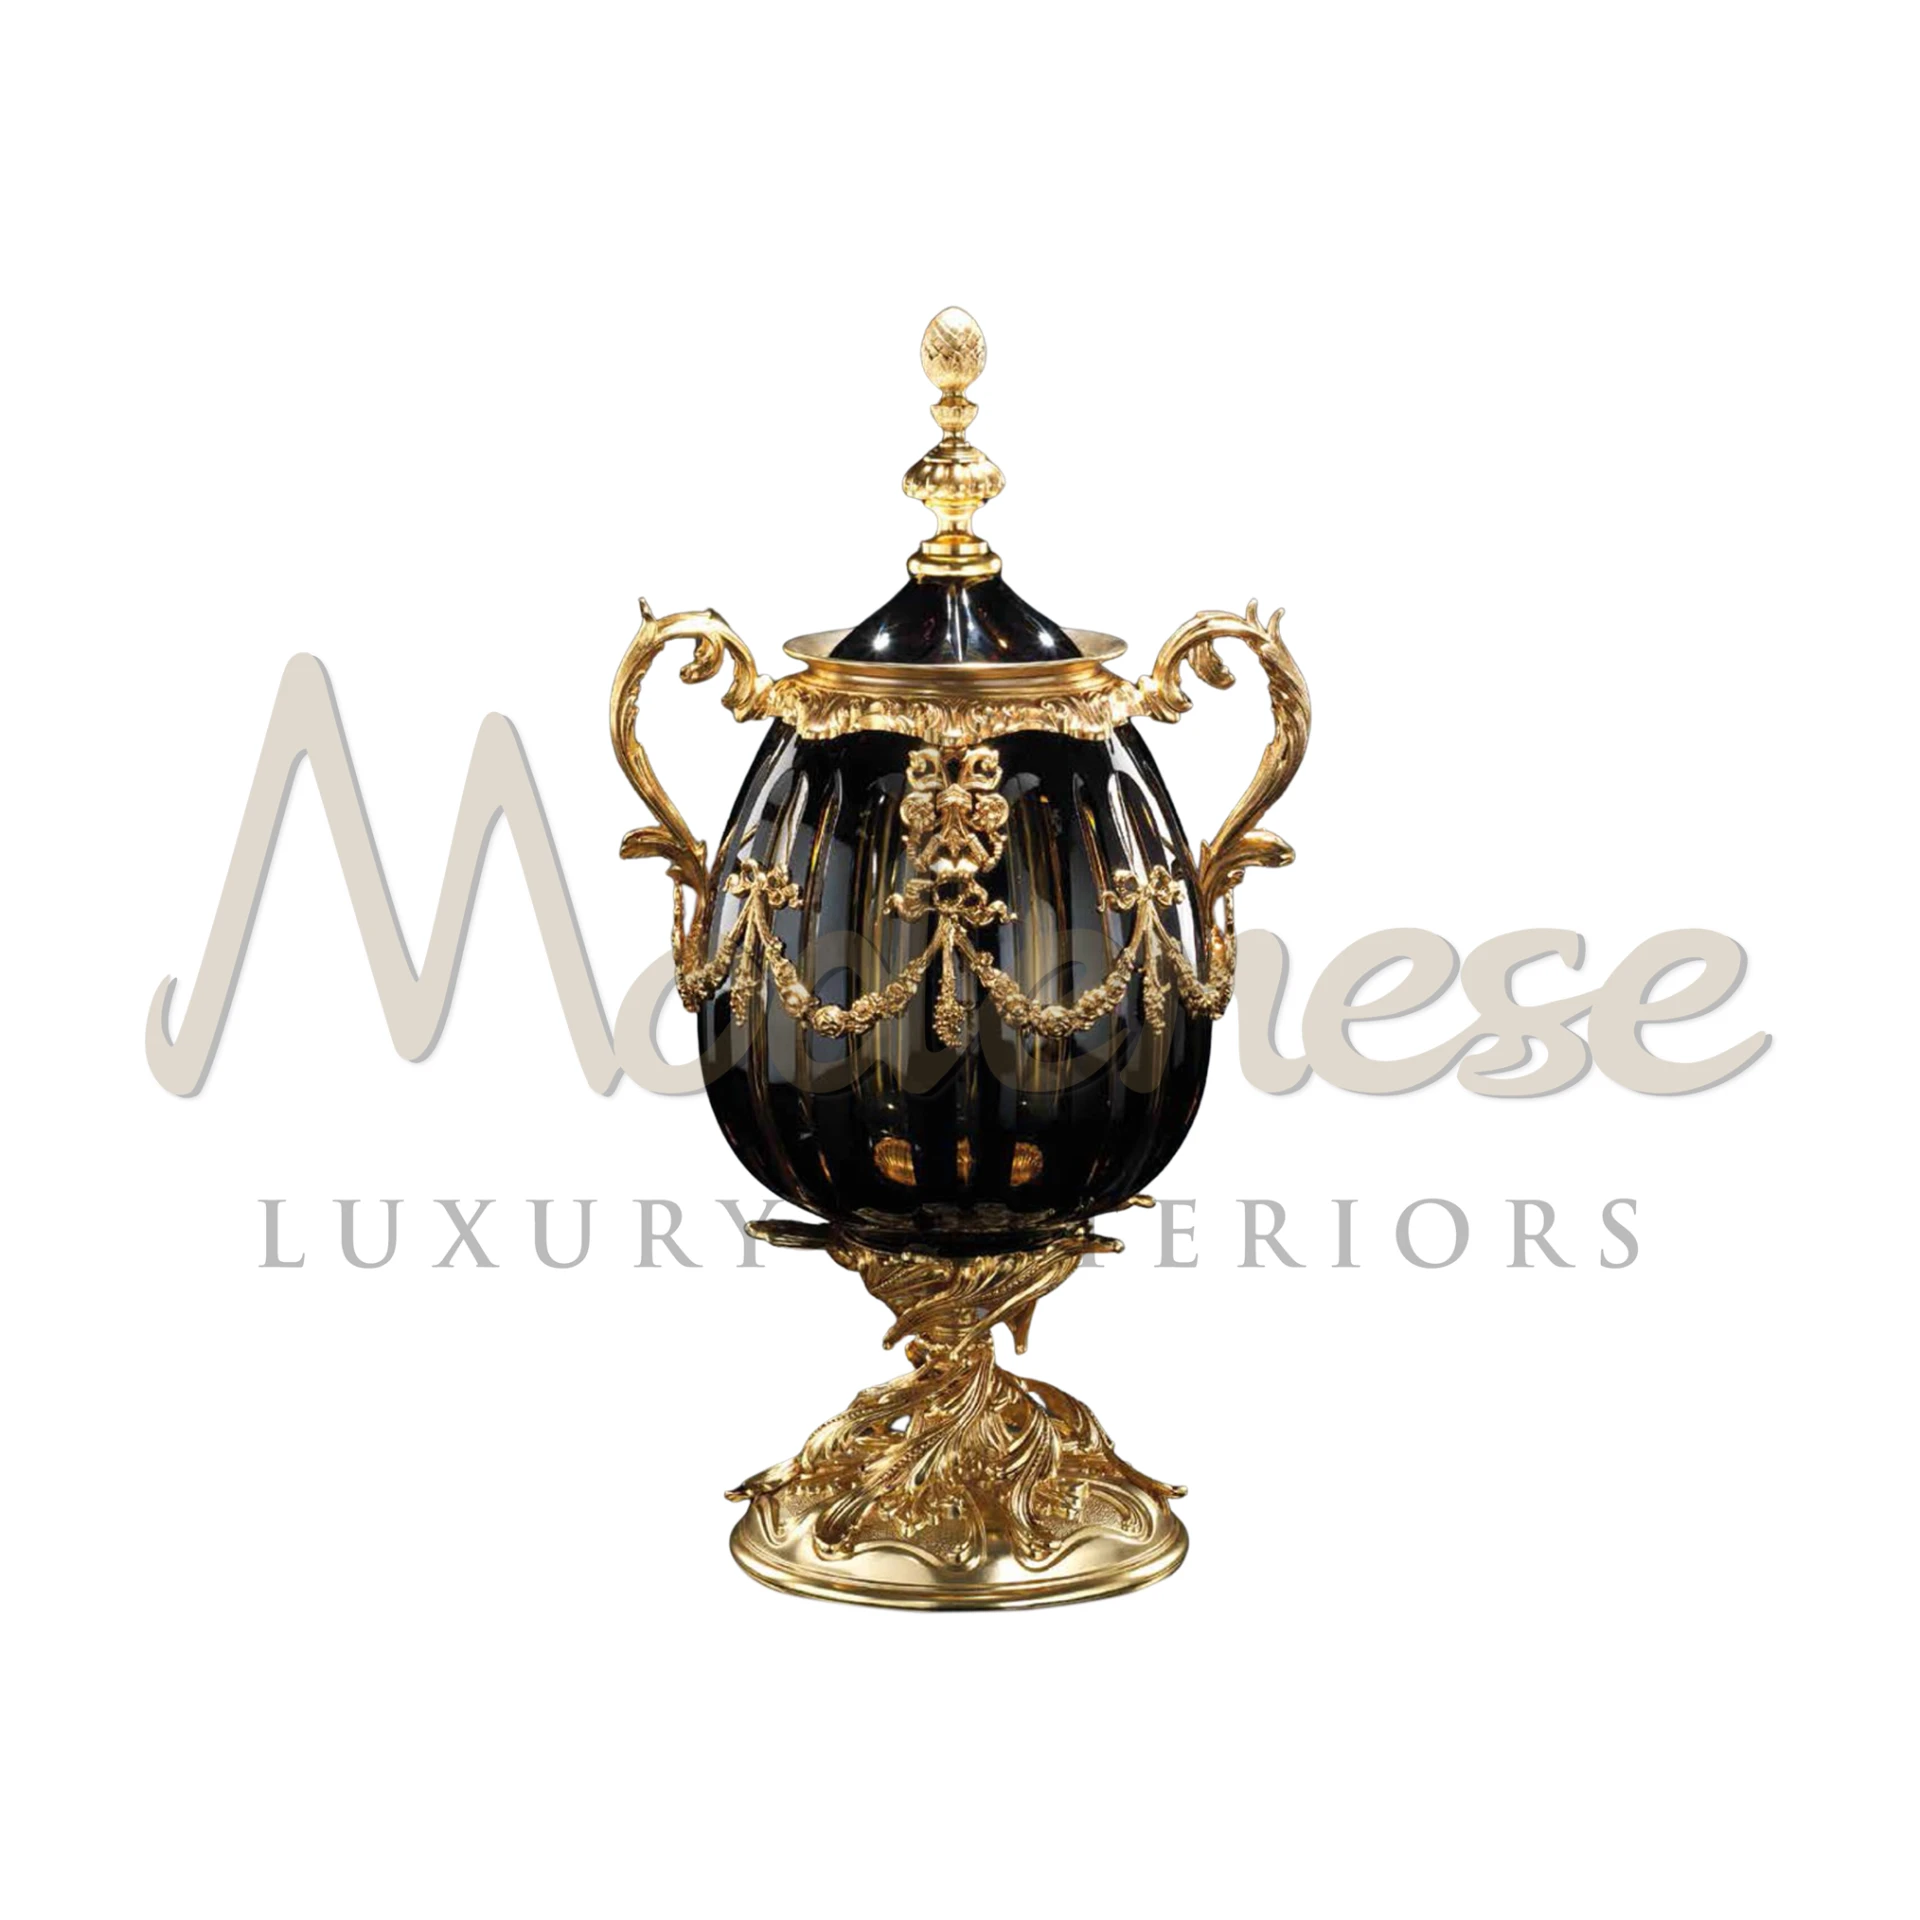 Italian design glass box, showcasing intricate etching inspired by classical Italian architecture for luxury interiors.